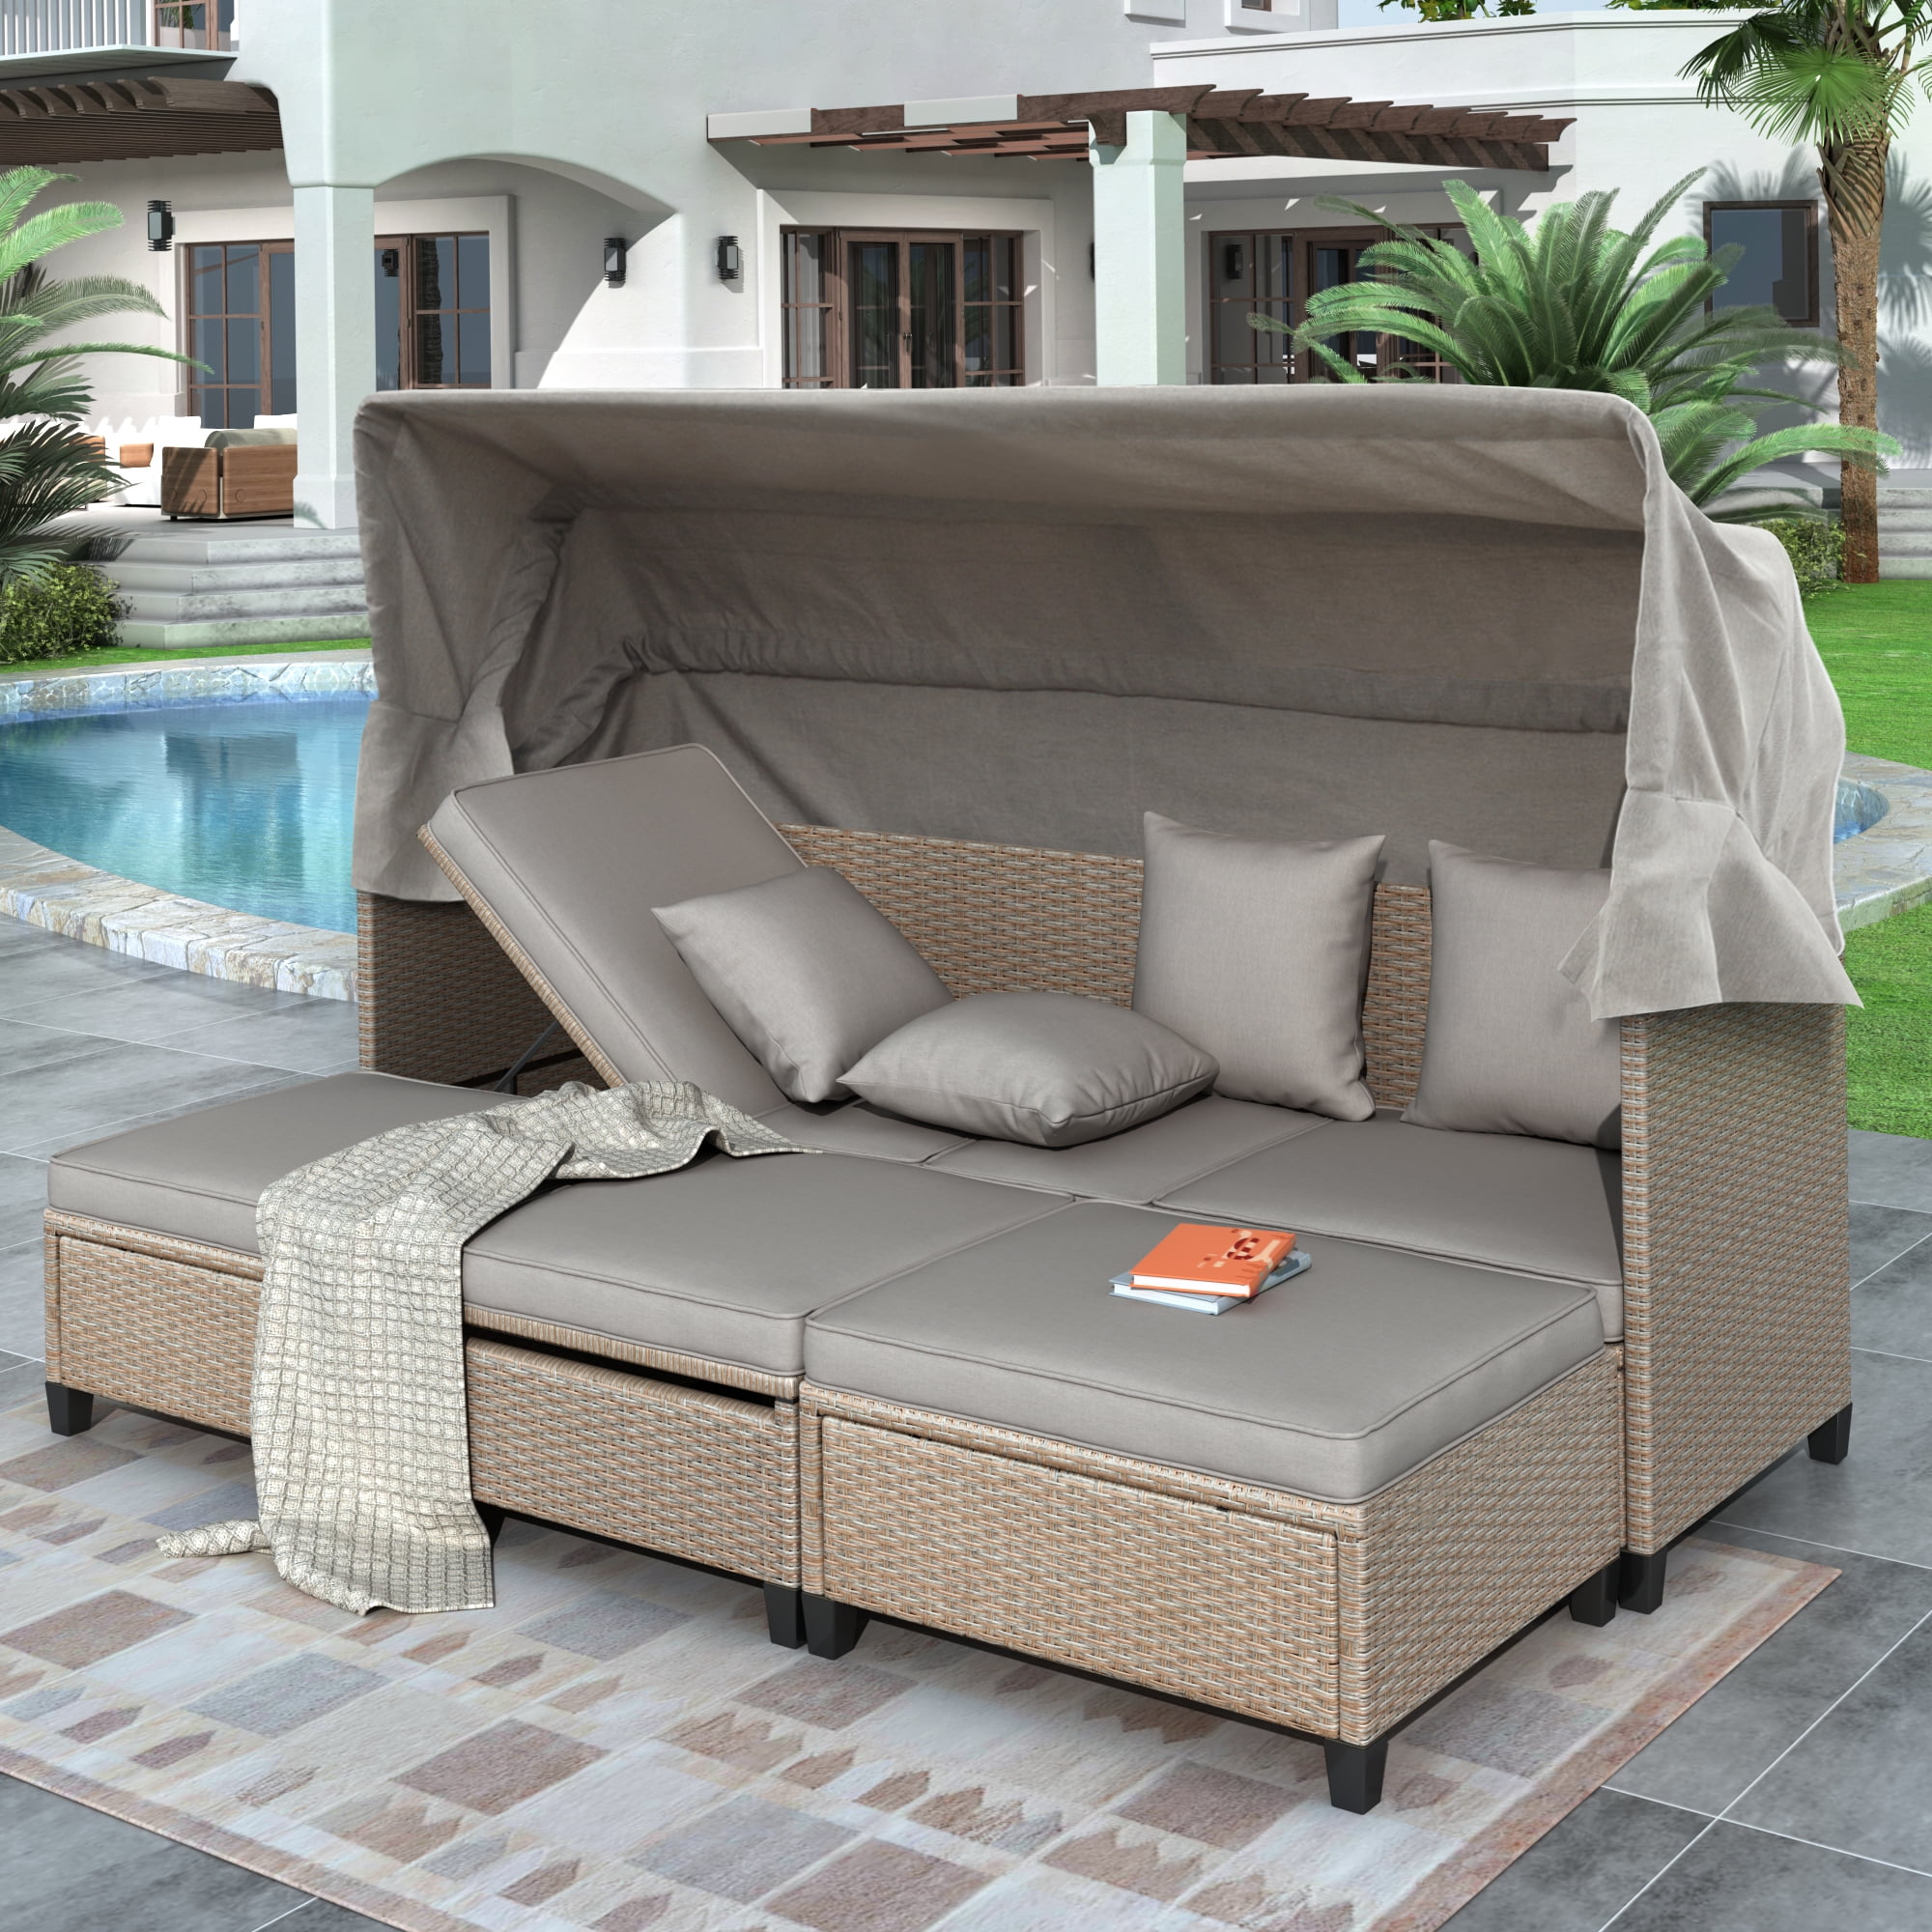 Enyopro 4 Piece Outdoor Daybed Pe Rattan Patio Daybed